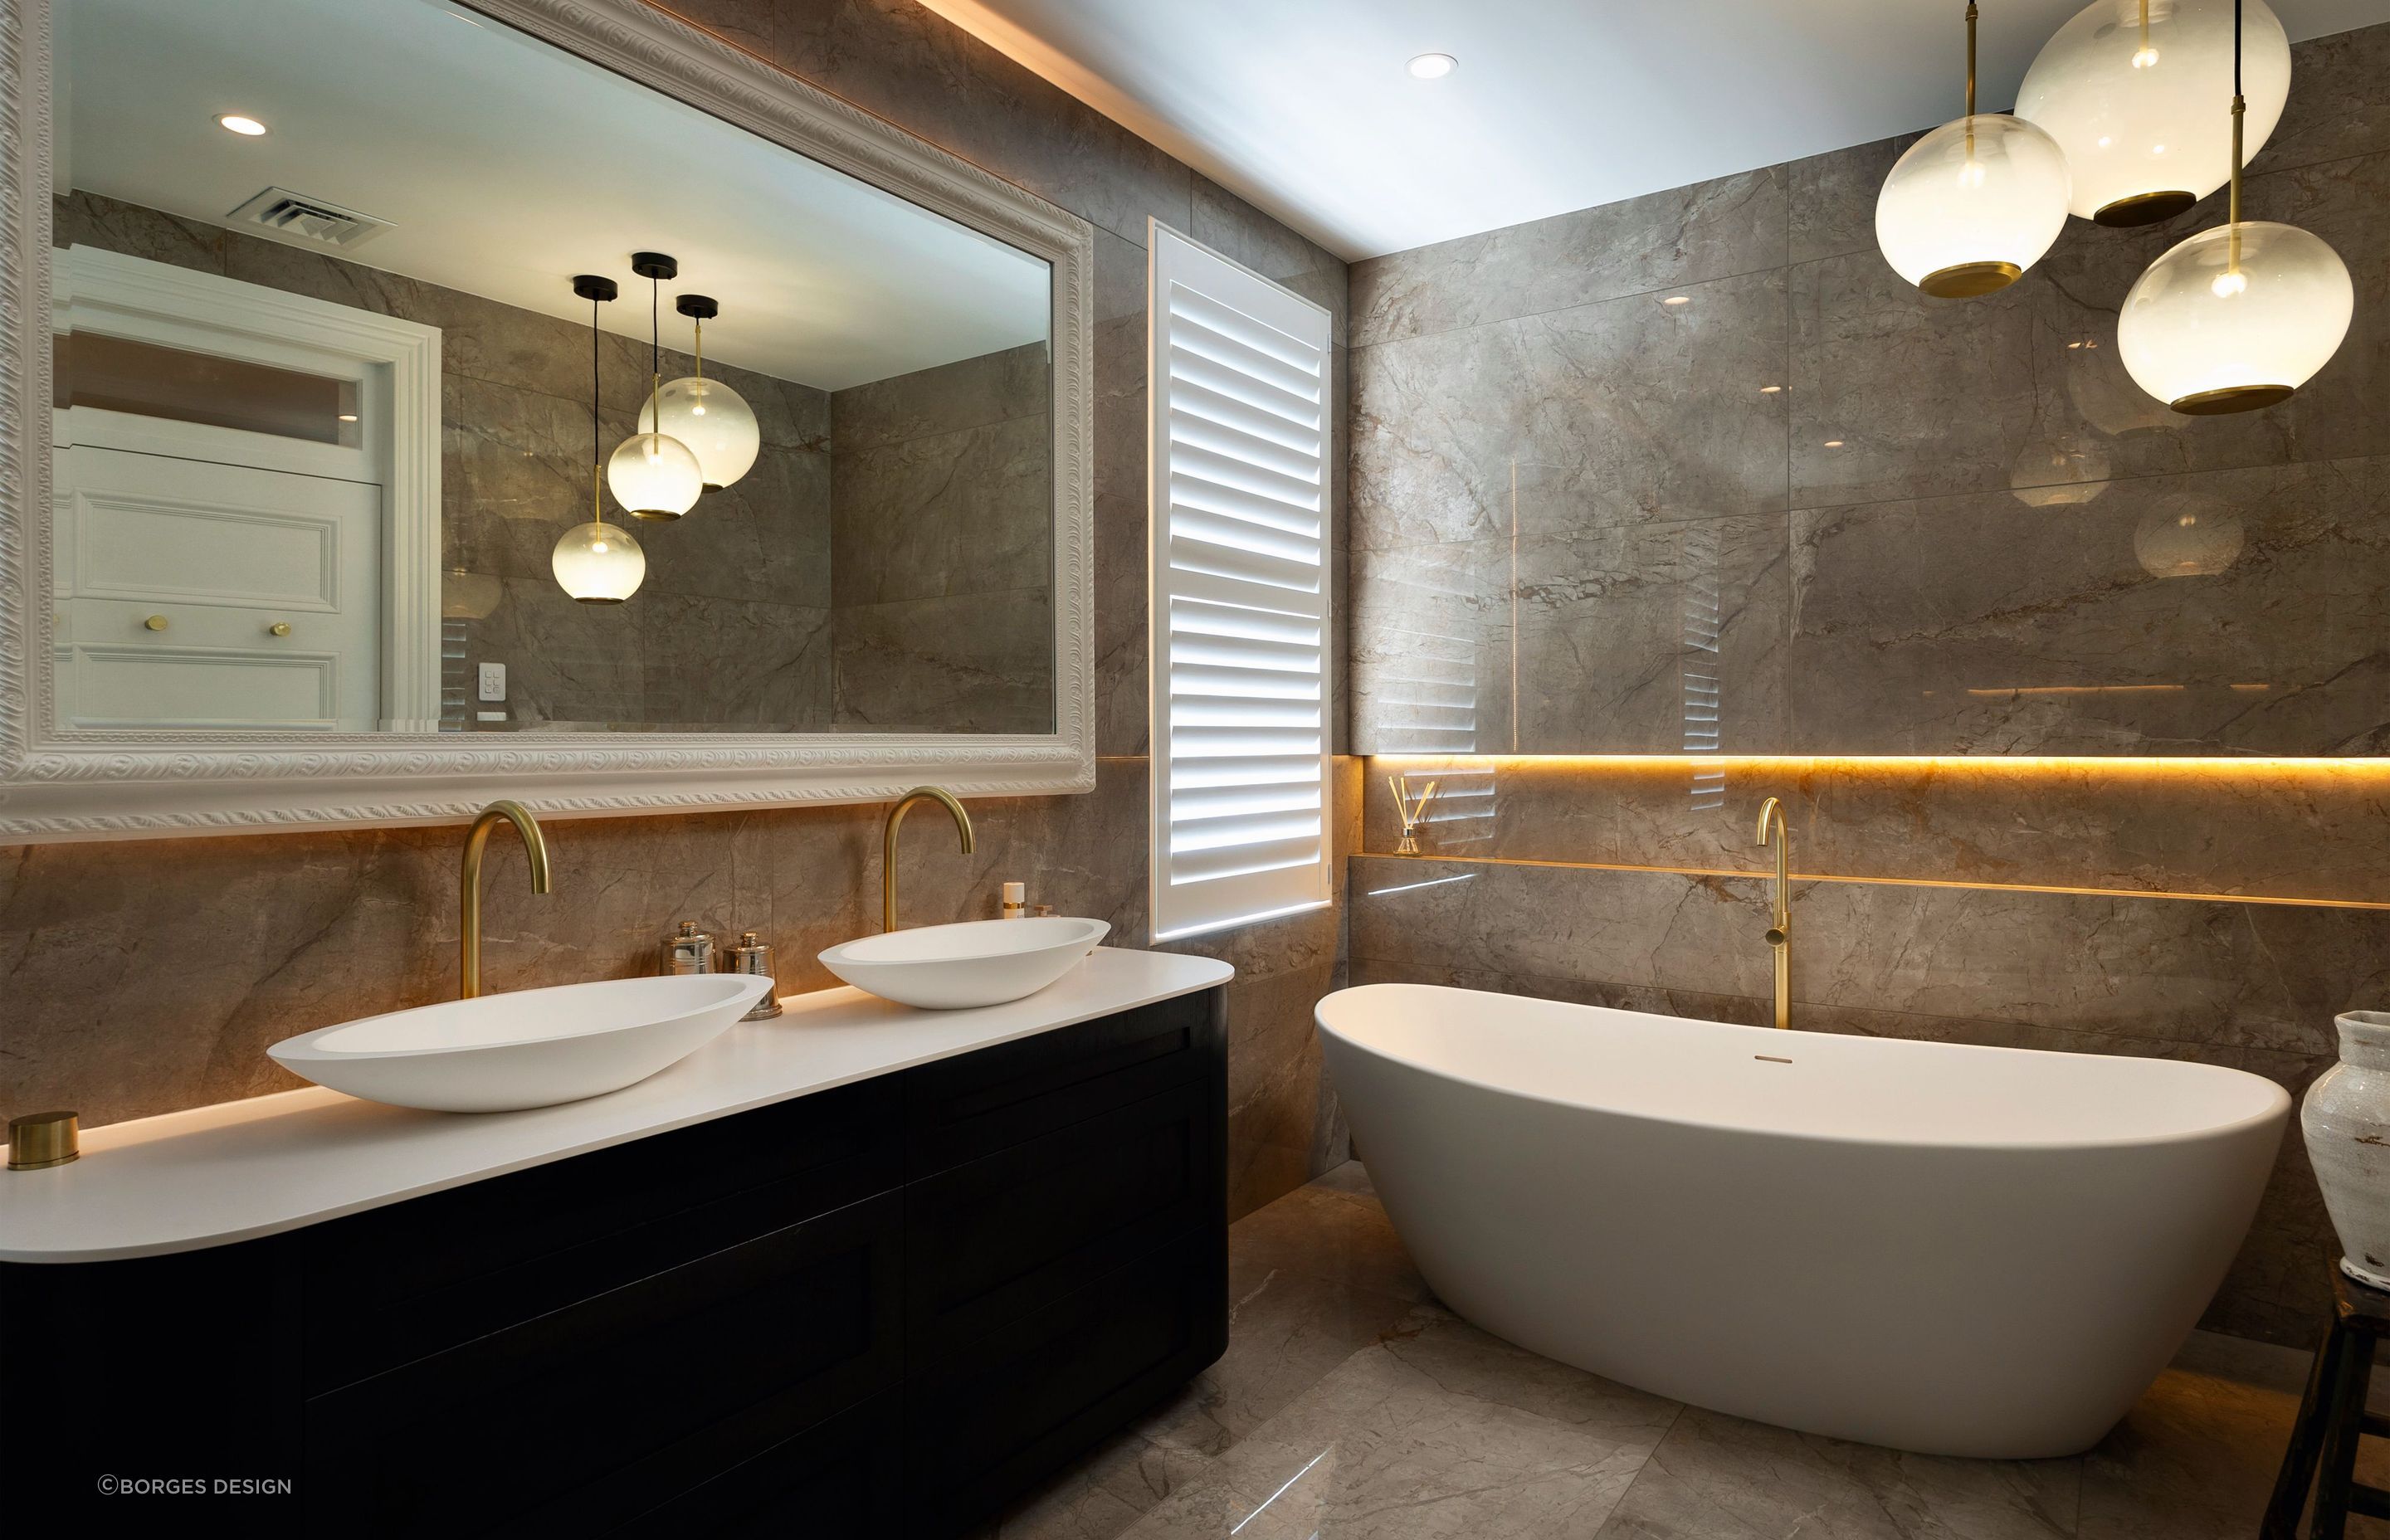 The exquisite natural veining of marble beautifies this Remuera bathroom renovation.